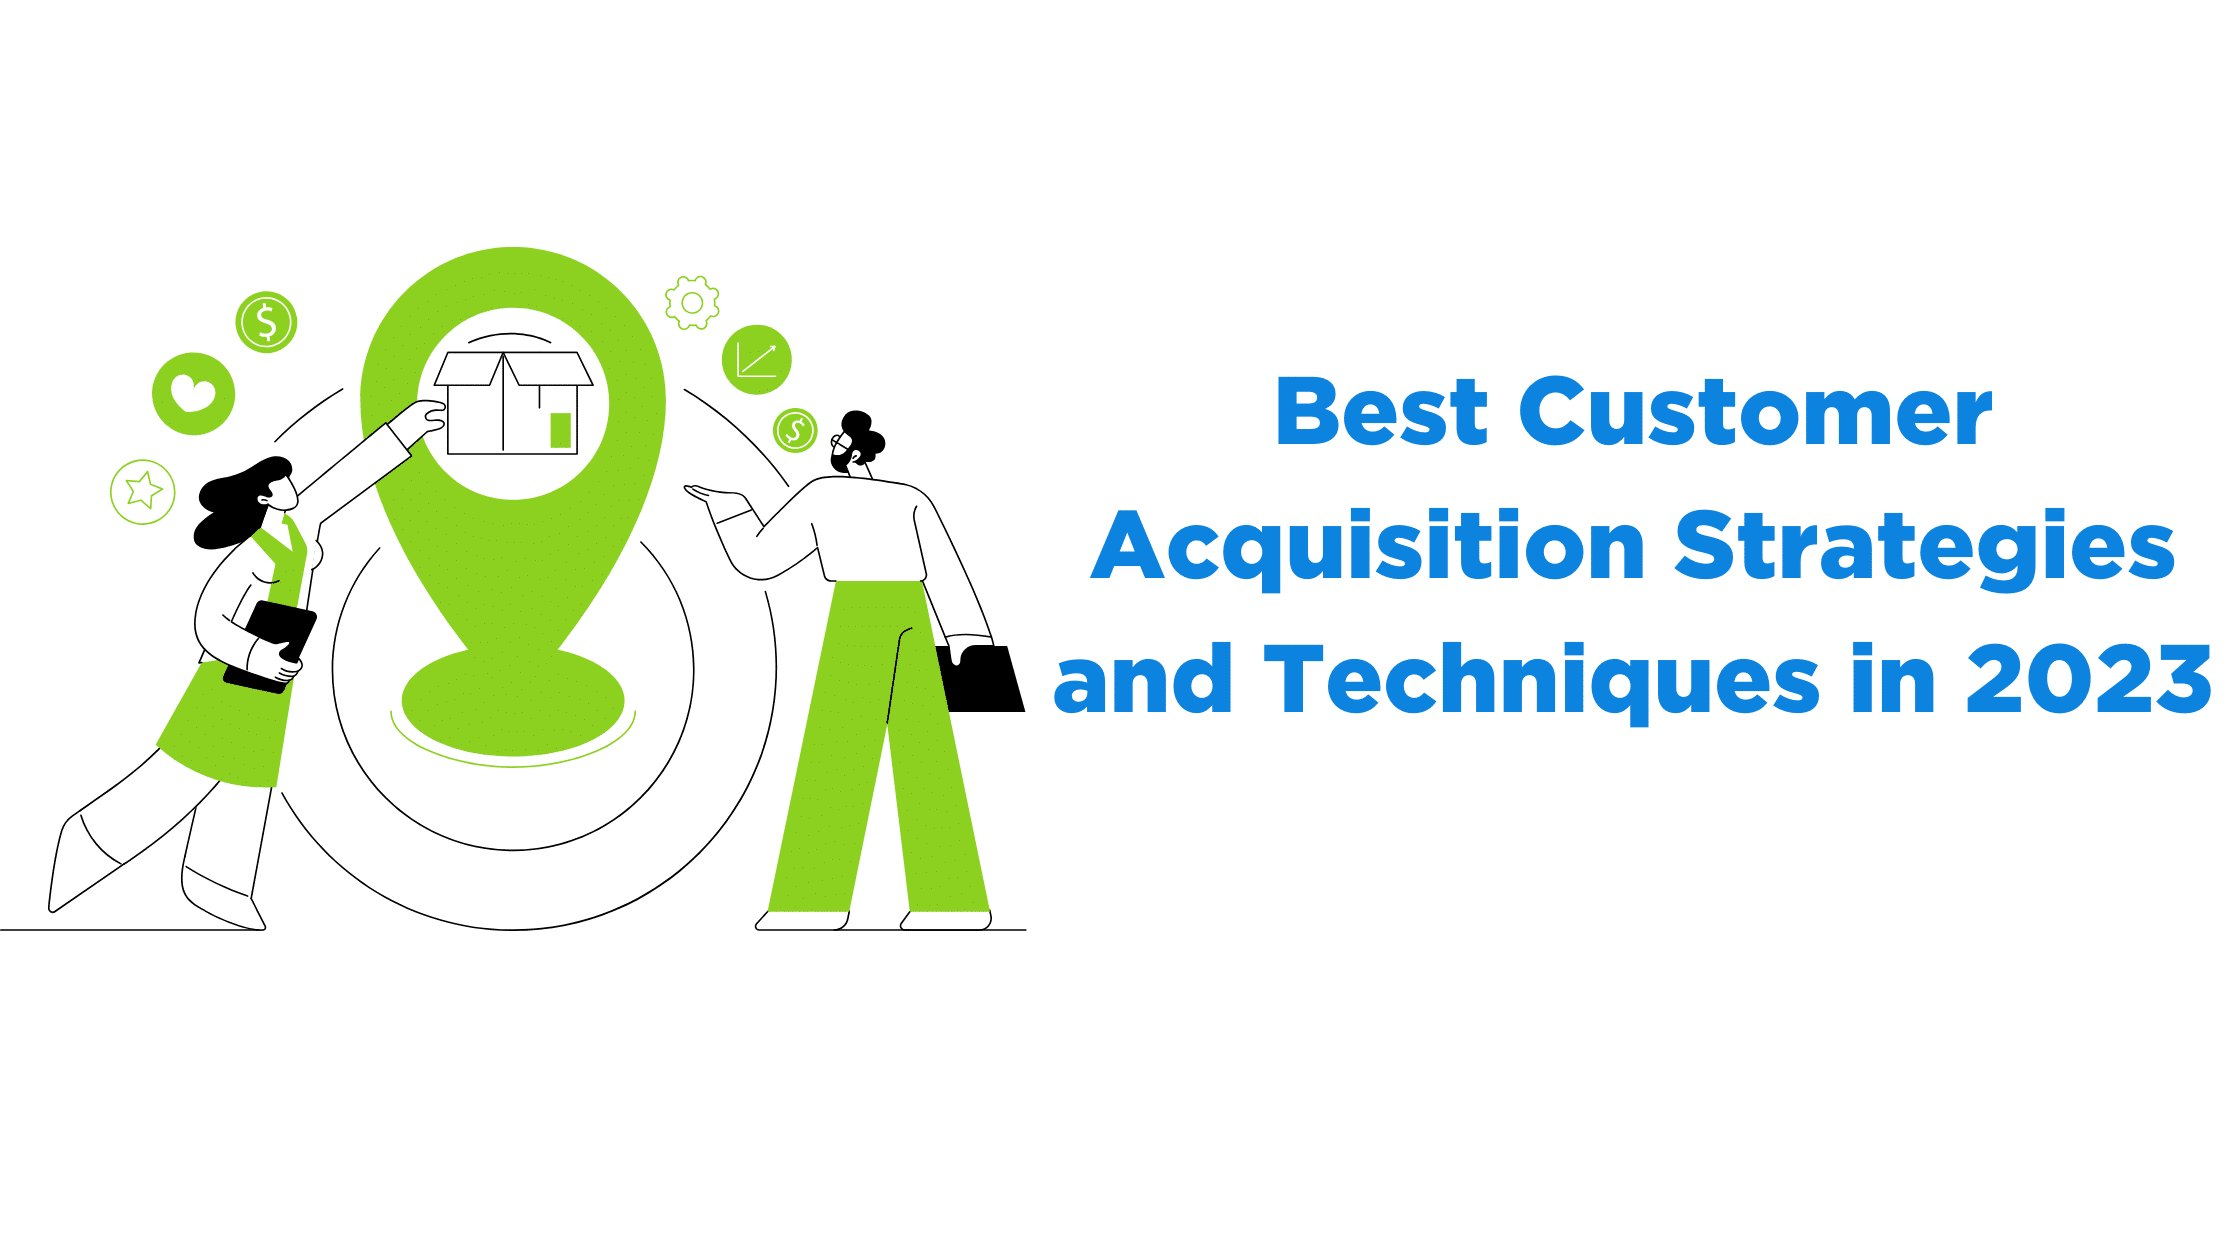 Best Customer Acquisition Strategies and Techniques in 2023